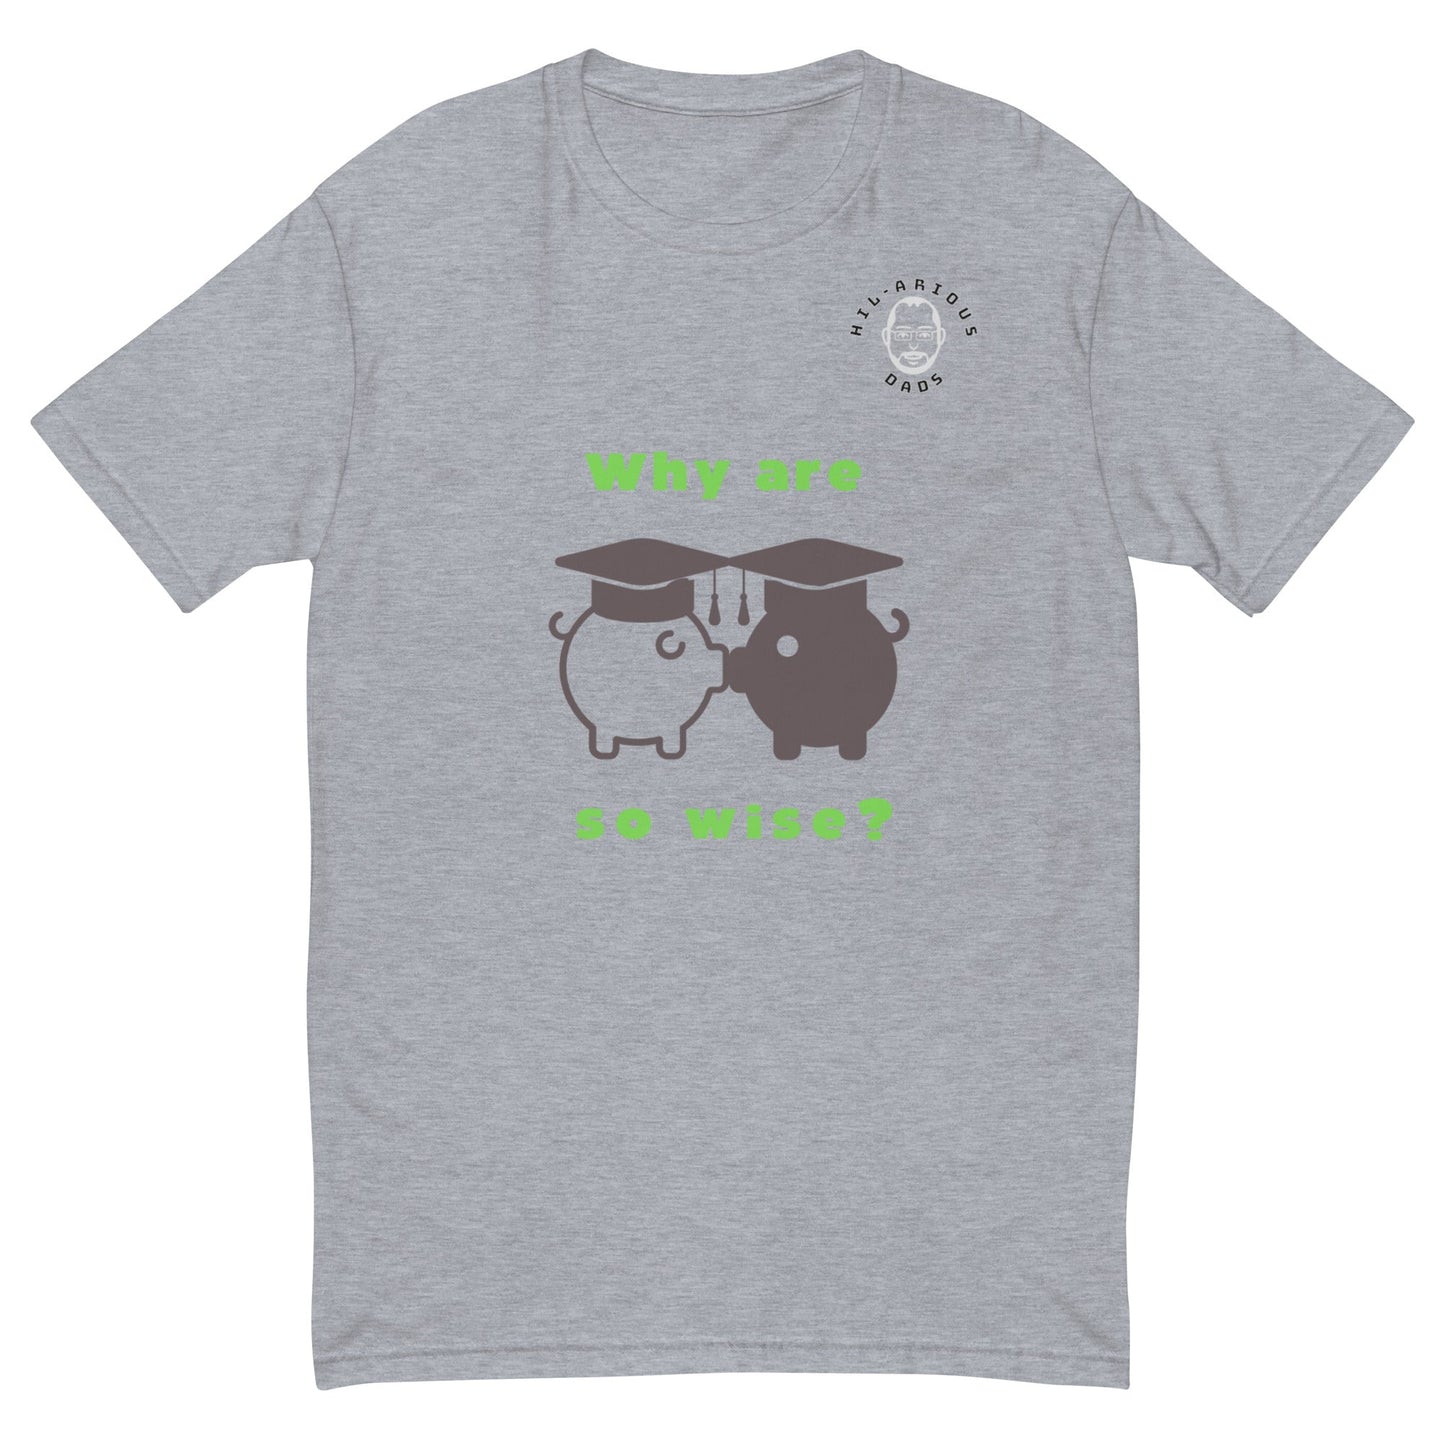 Why are Piggies so wise?-T-shirt - Hil-arious Dads